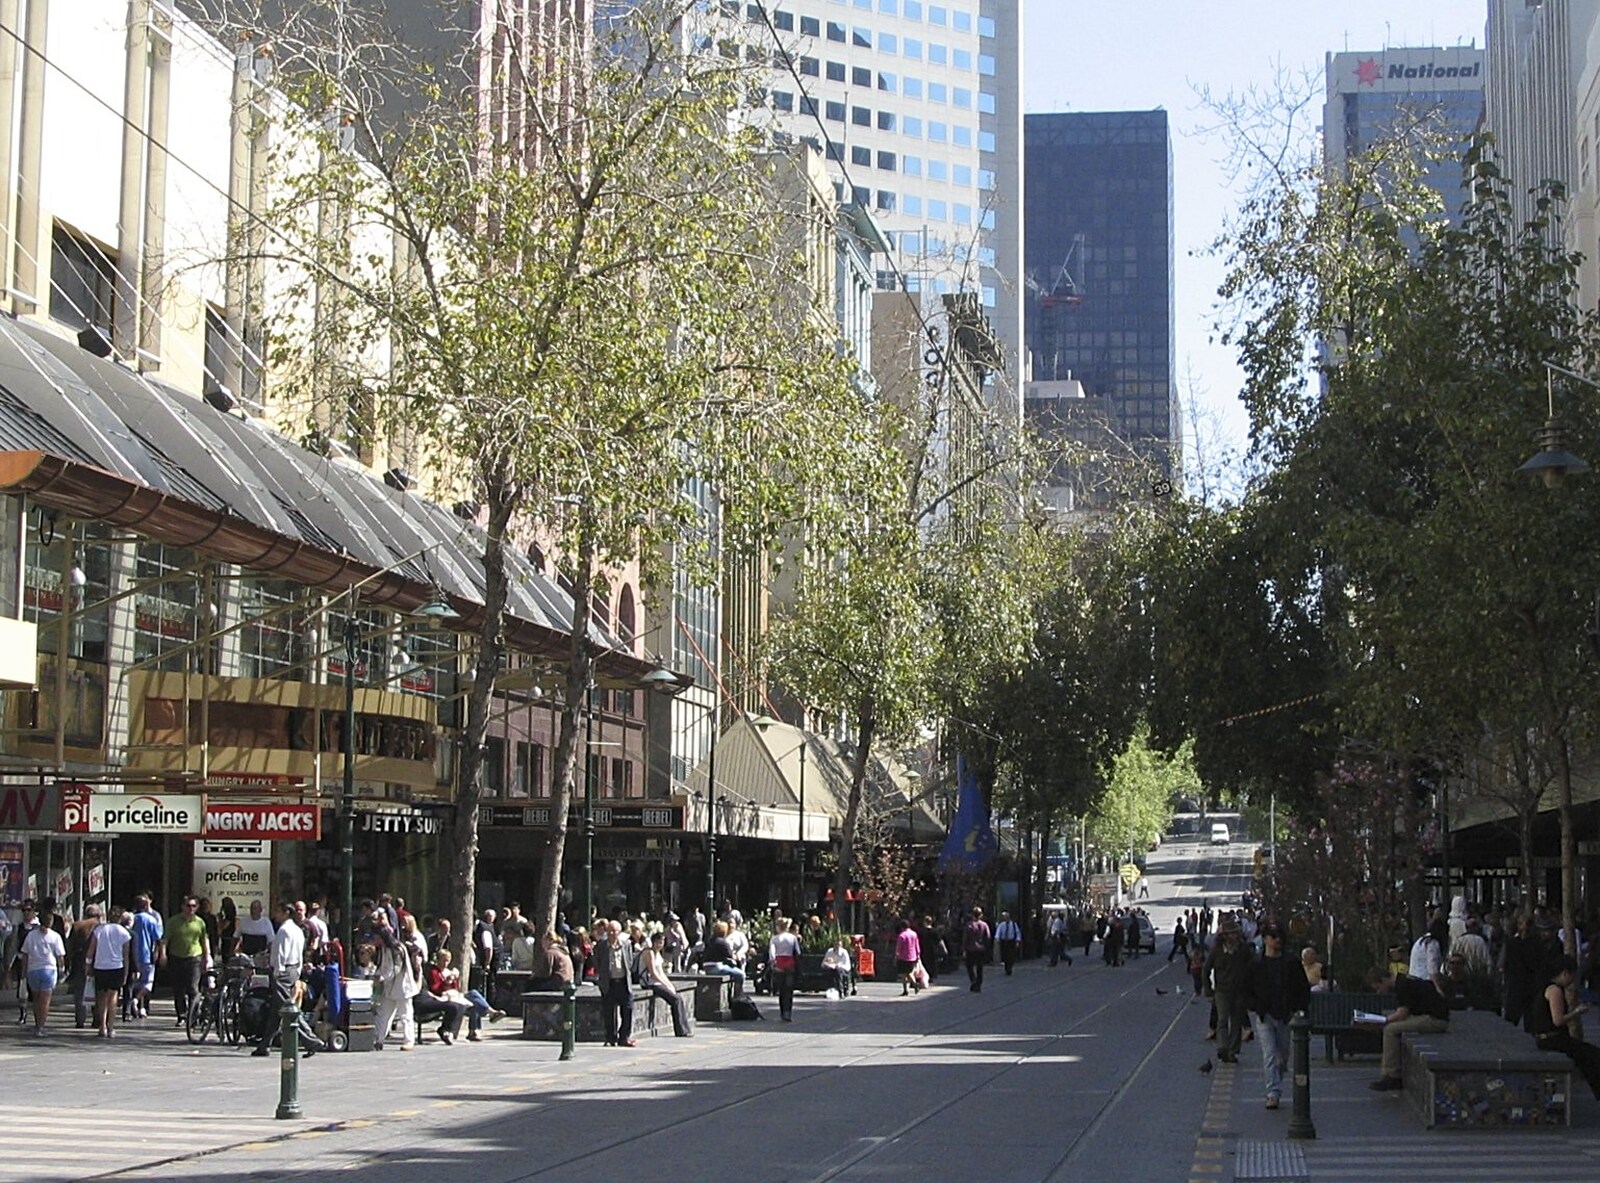 A Melbourne street from A Couple of Days in Melbourne, Victoria, Australia - 5th October 2004